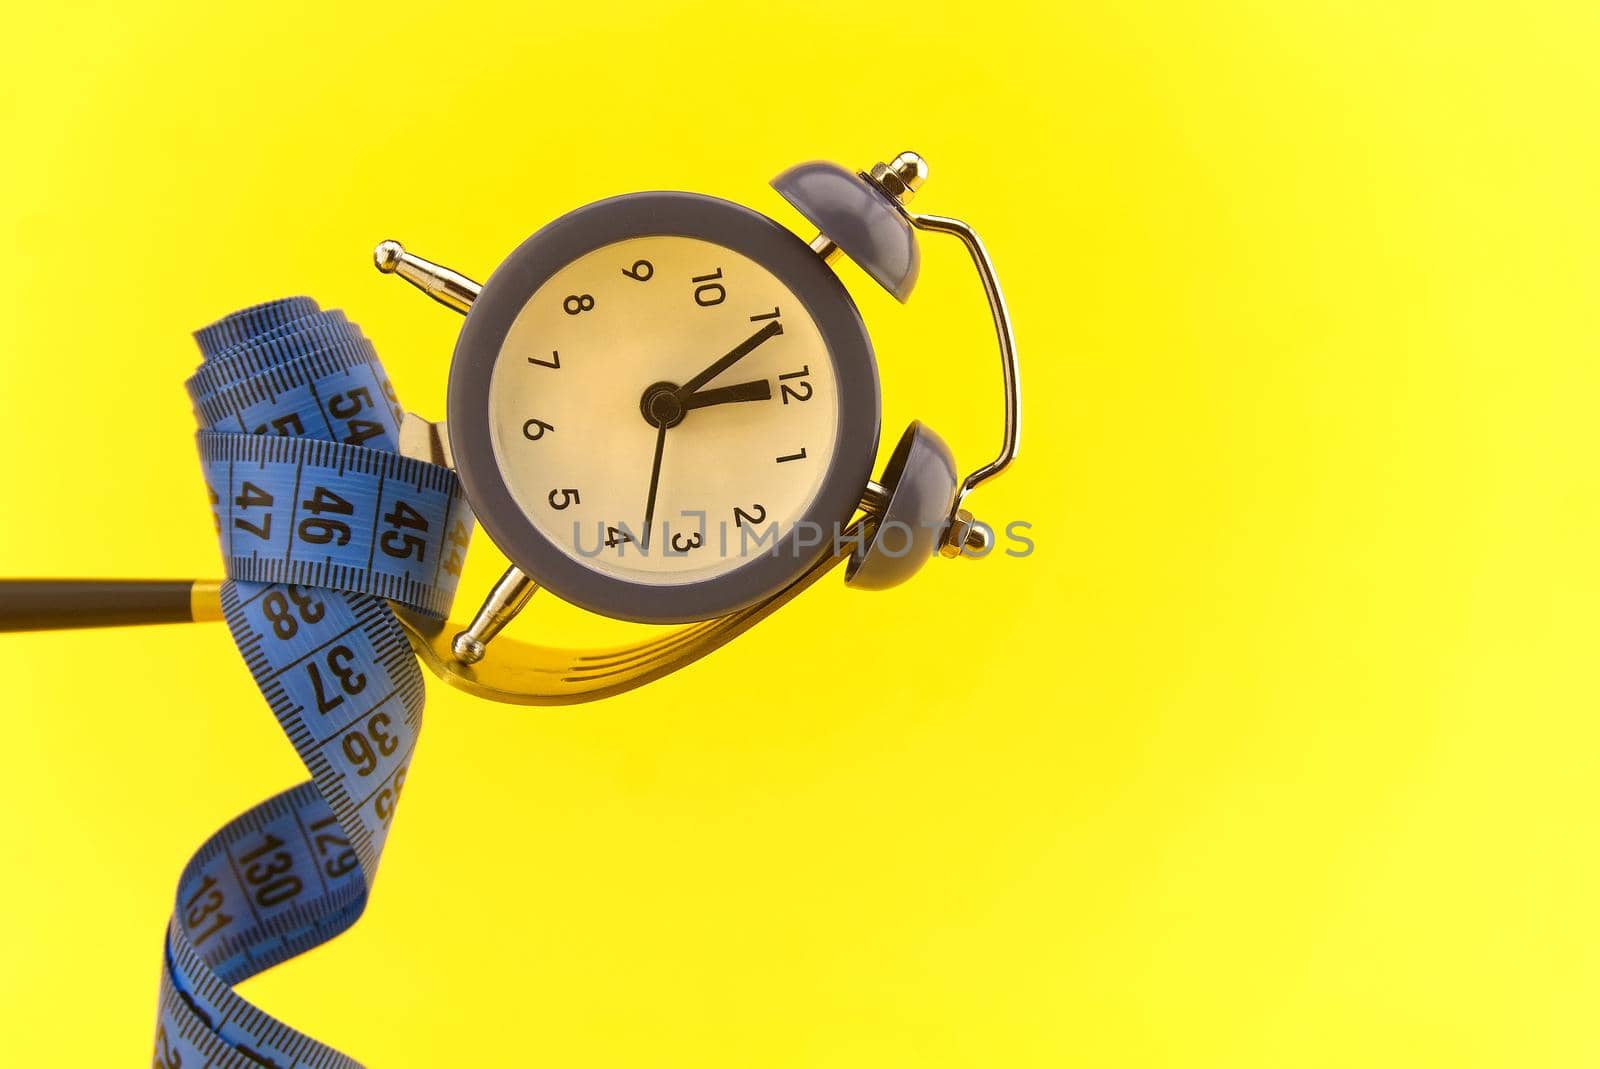 Alarm clock on golden fork wrapped with measuring tape above yellow background, weight loss or diet concept with copy space